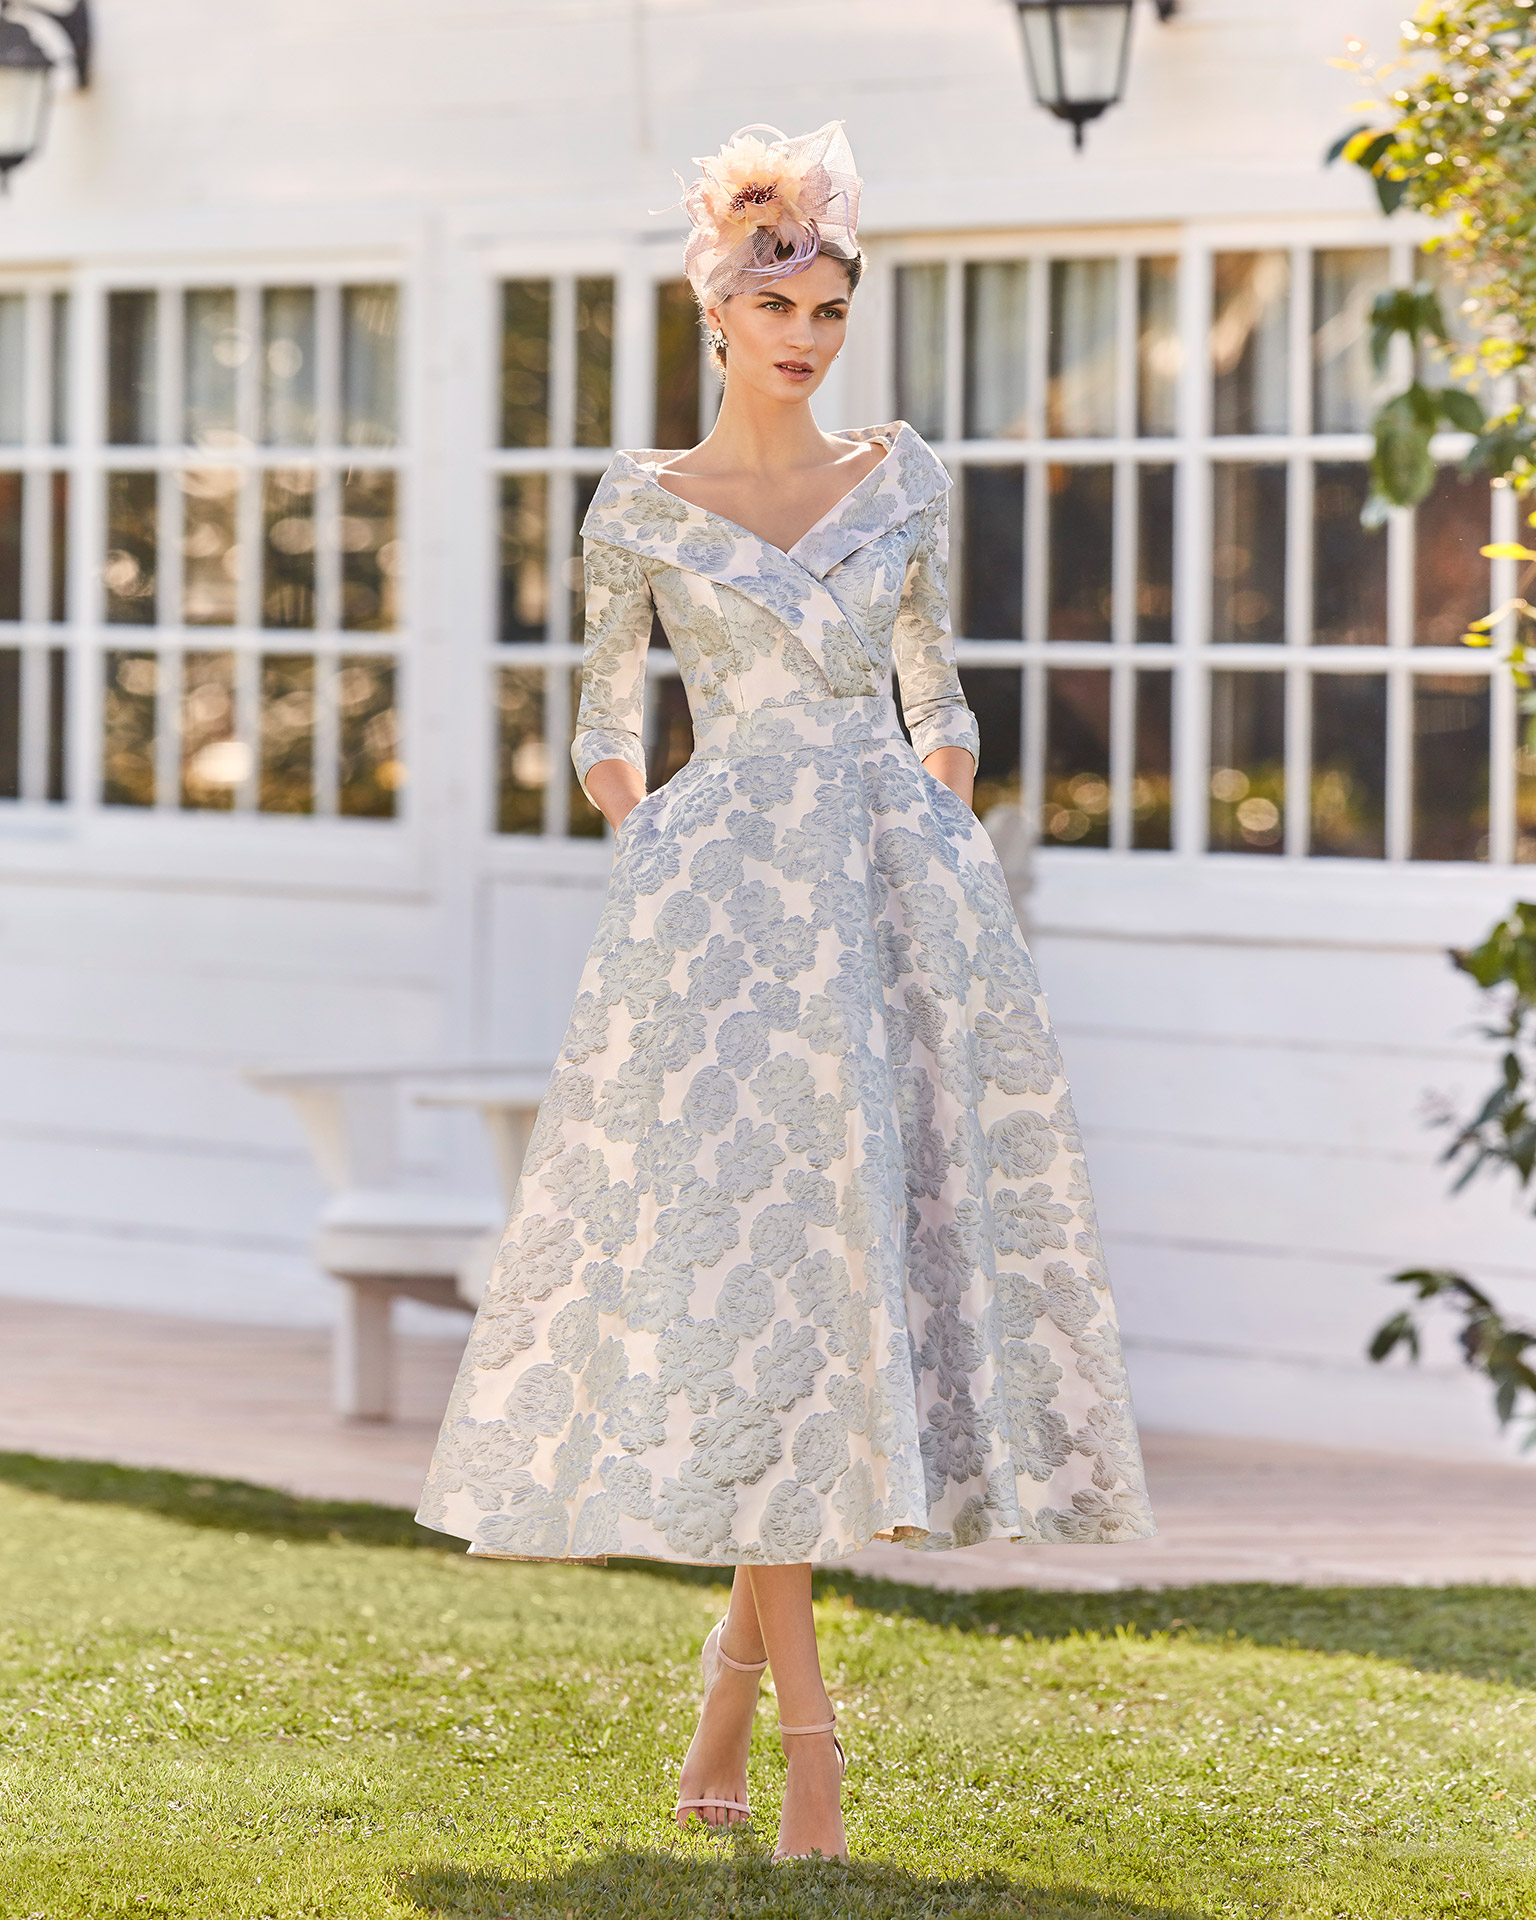 Brocade cocktail dress. Off-the-shoulder crossover neckline with three-quarter sleeves. 2021 COUTURE CLUB Collection.